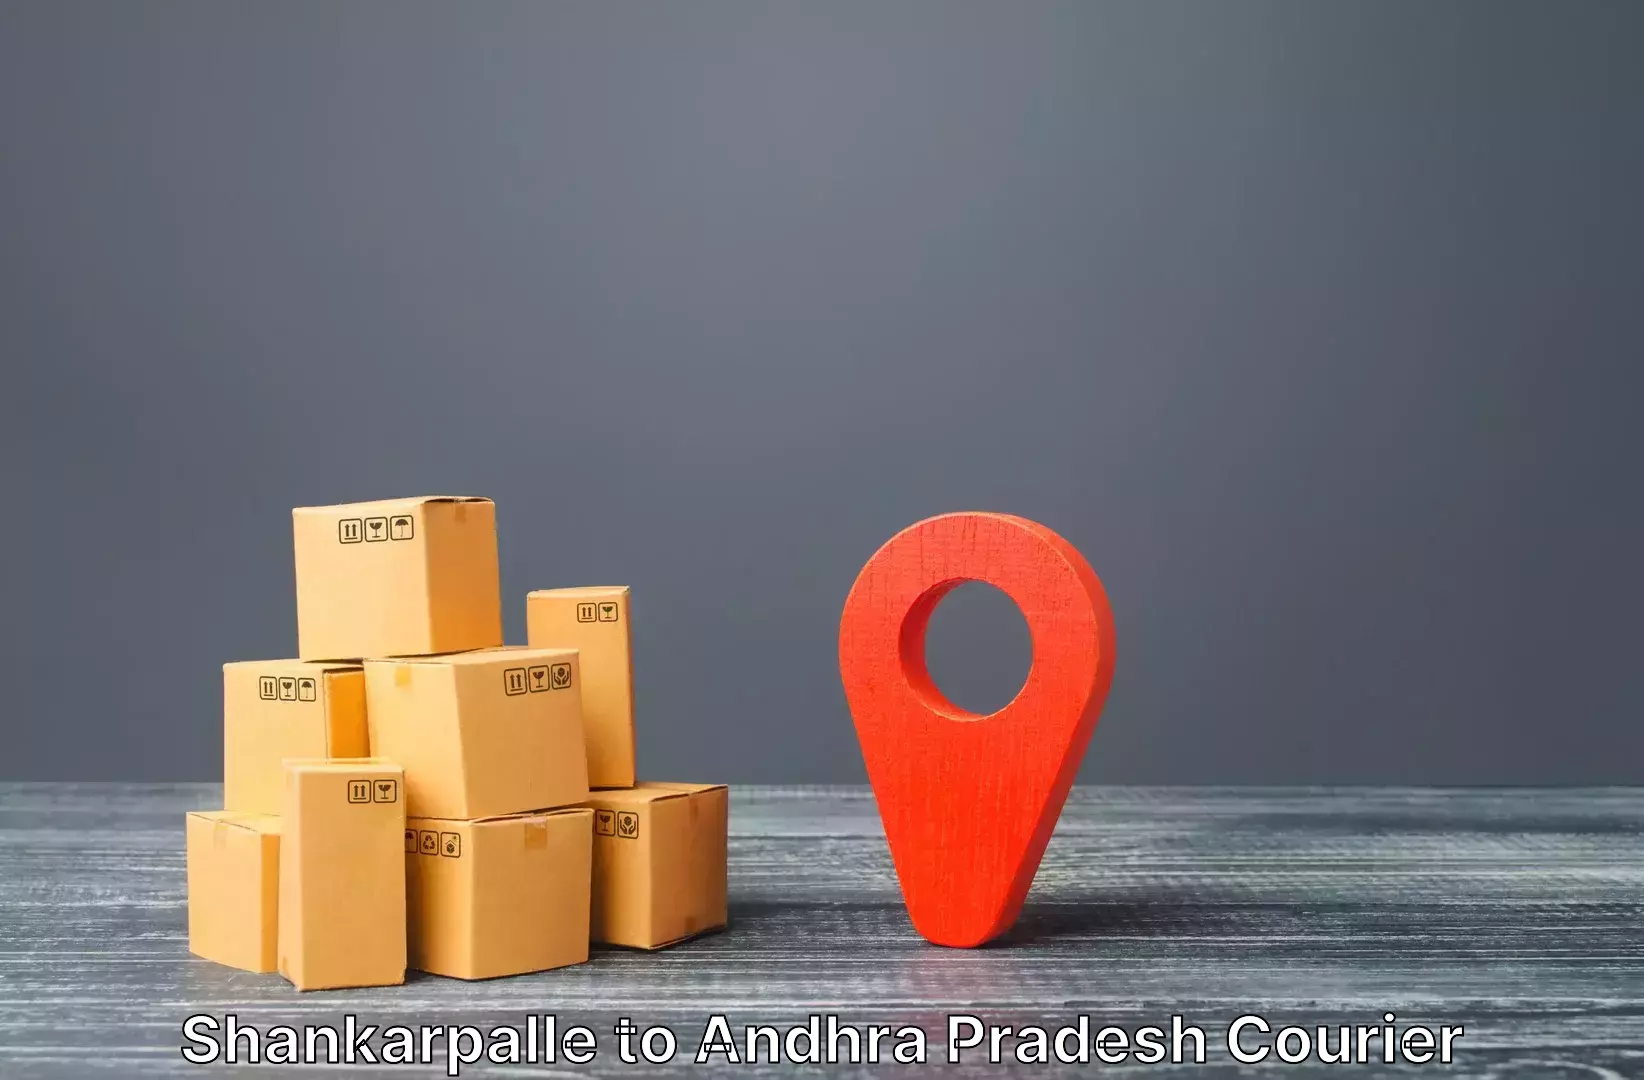 Luggage shipping specialists Shankarpalle to Andhra Pradesh